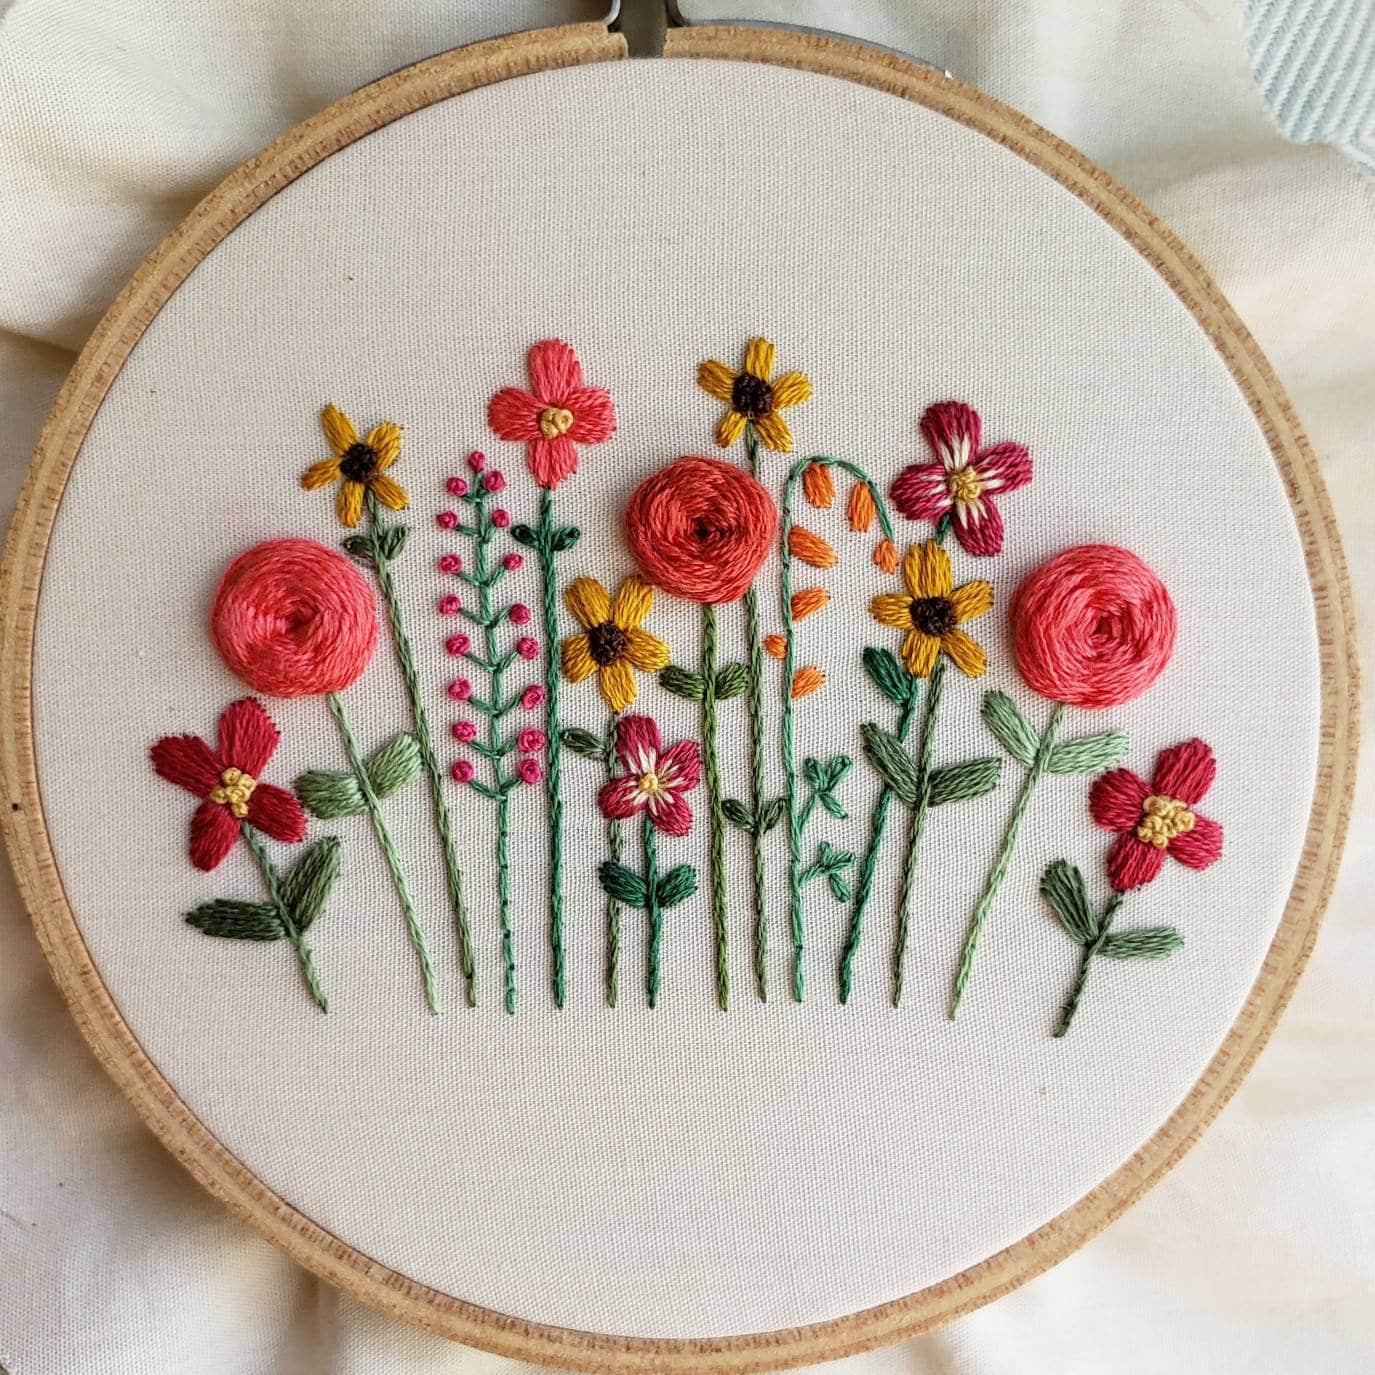 Hand Embroidery: 9 Amazing Embroidery Stitches For Beginners